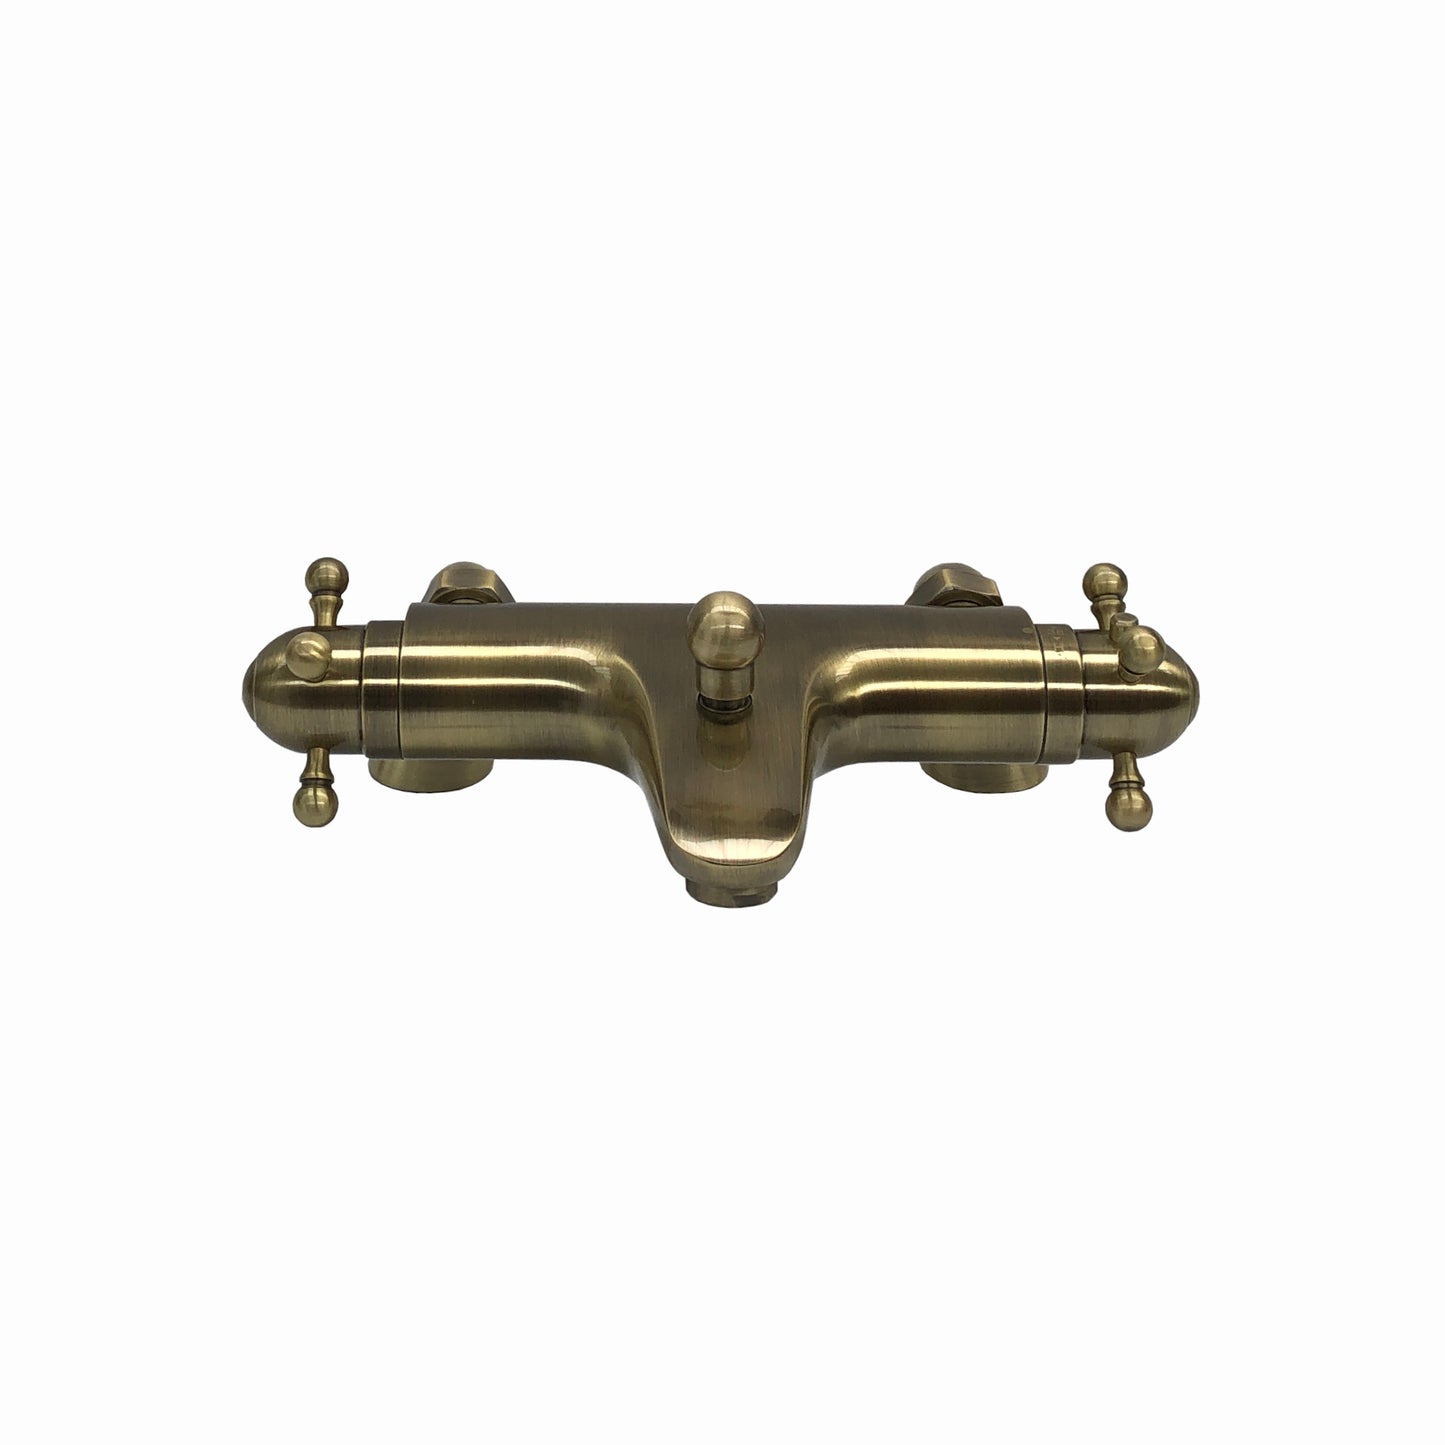 Gallant traditional thermostatic bath shower bar mixer valve deck mounted with slider rail kit - antique bronze